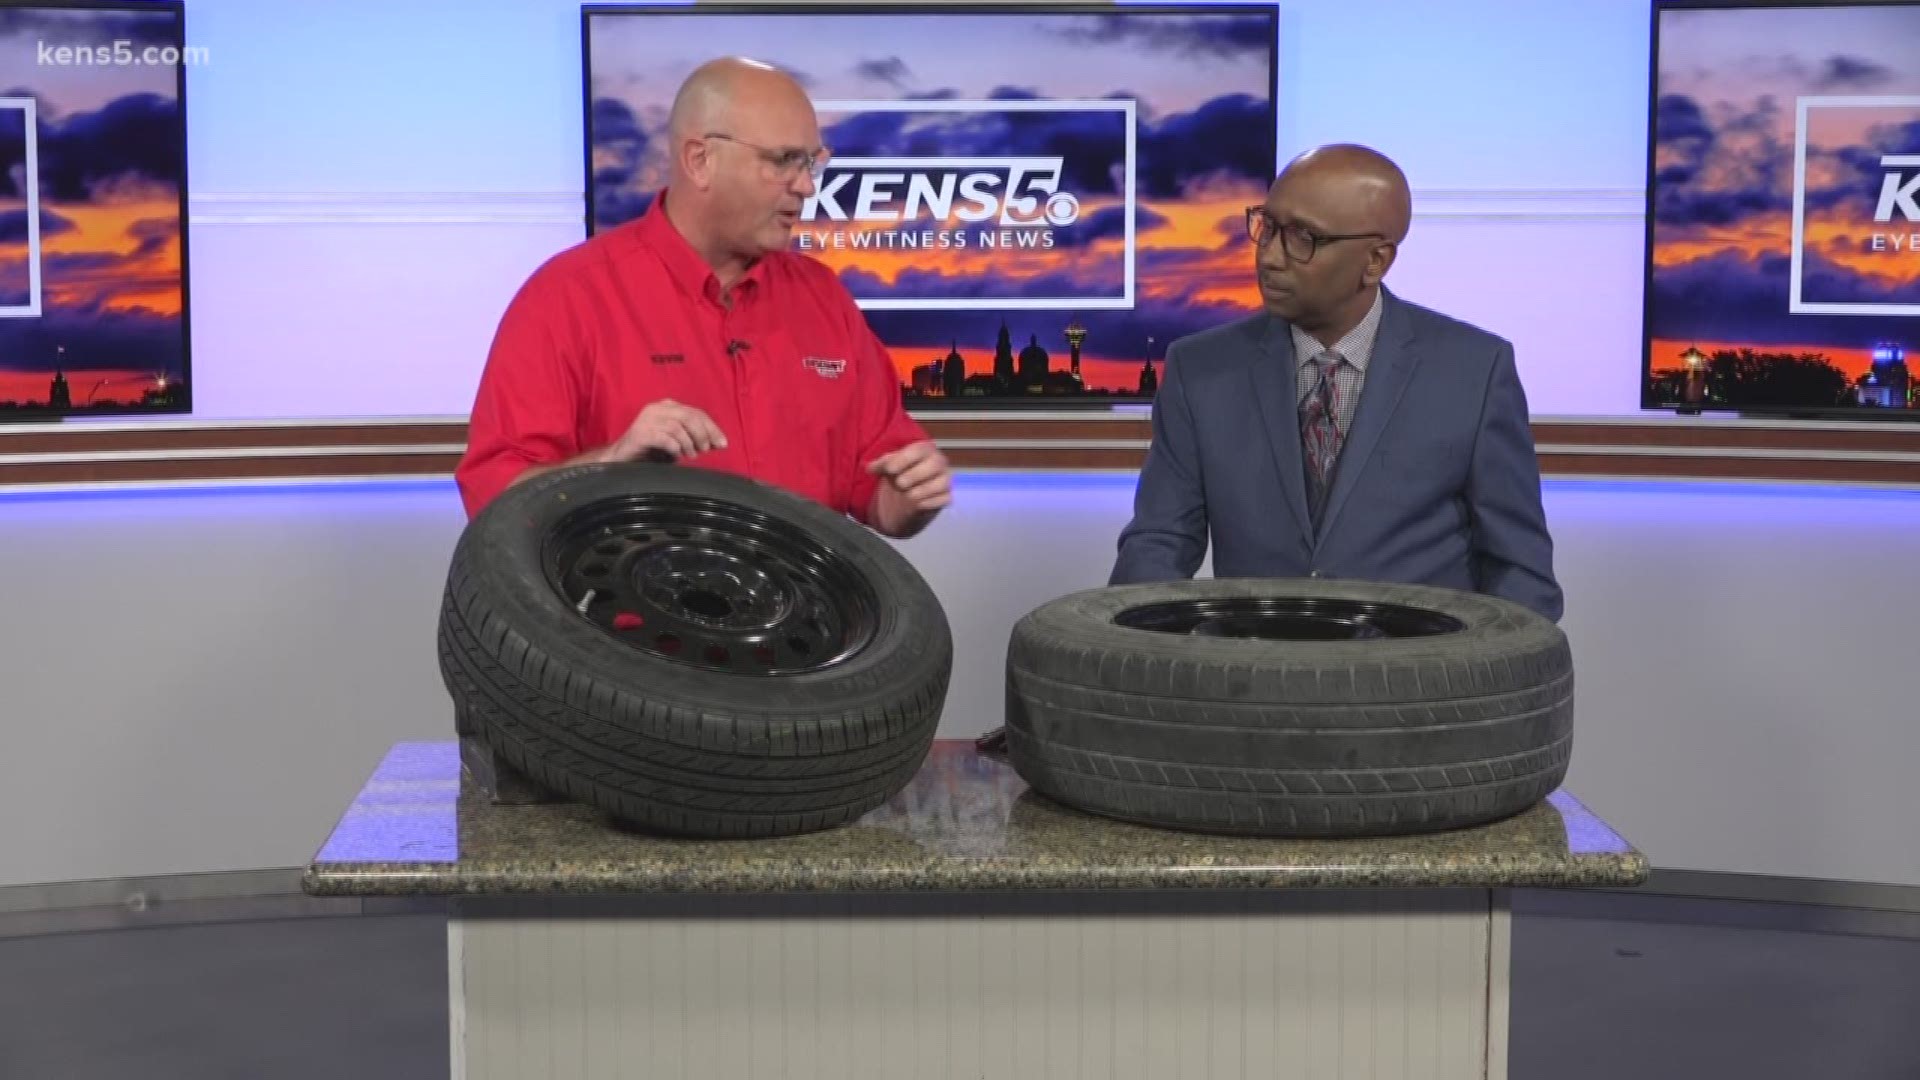 With temperatures heating up across Texas, you want to make sure your tires are ready for those summertime road trips. Kevin Robinson from Discount Tire stops by the KENS 5 studio to talk about summer tire safety.